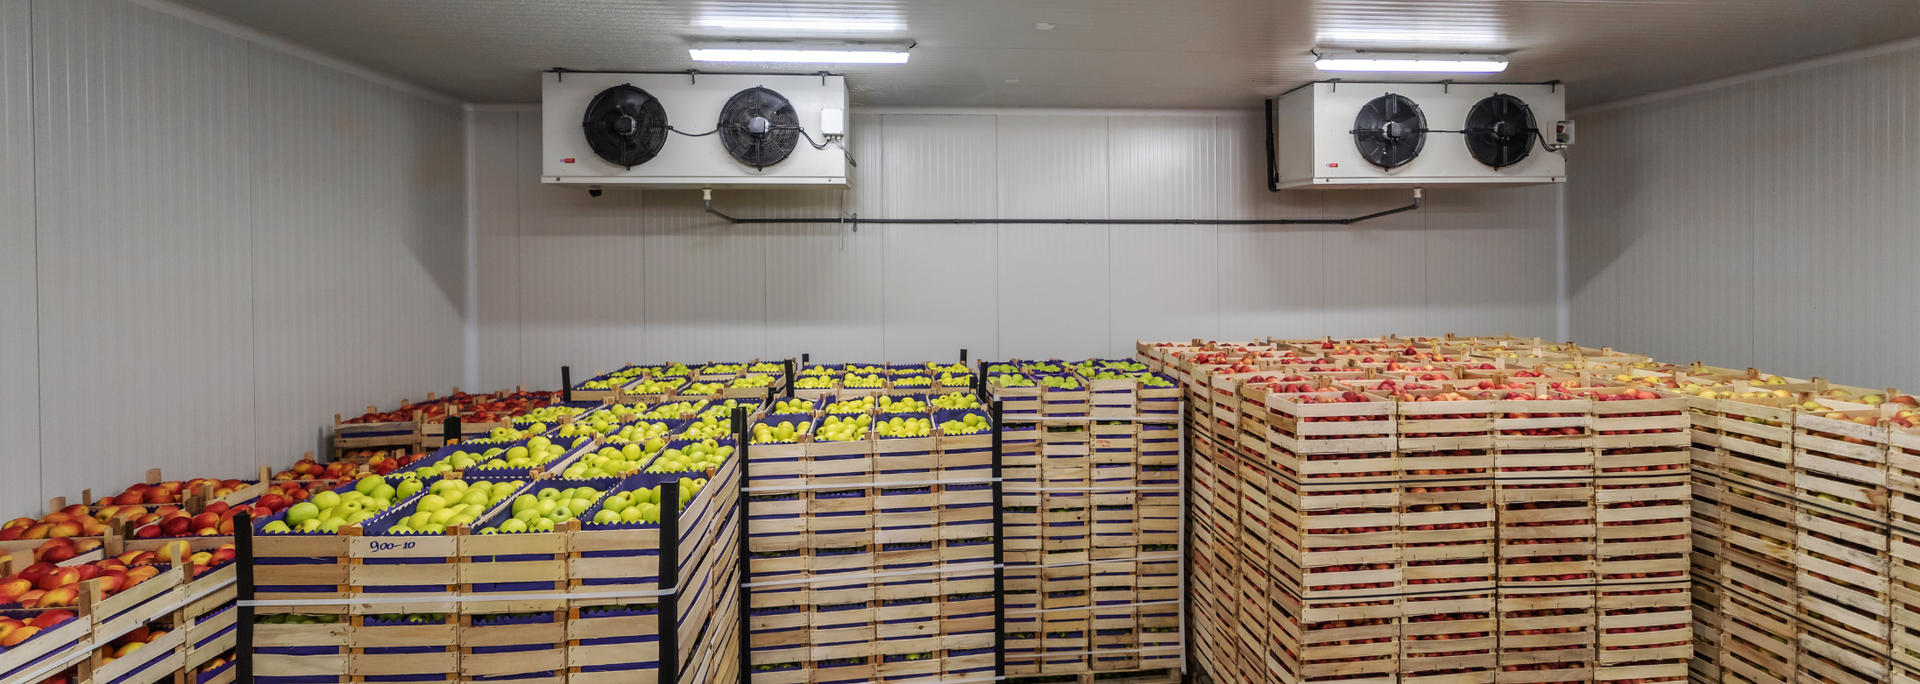 Picture of a food storage warehouse